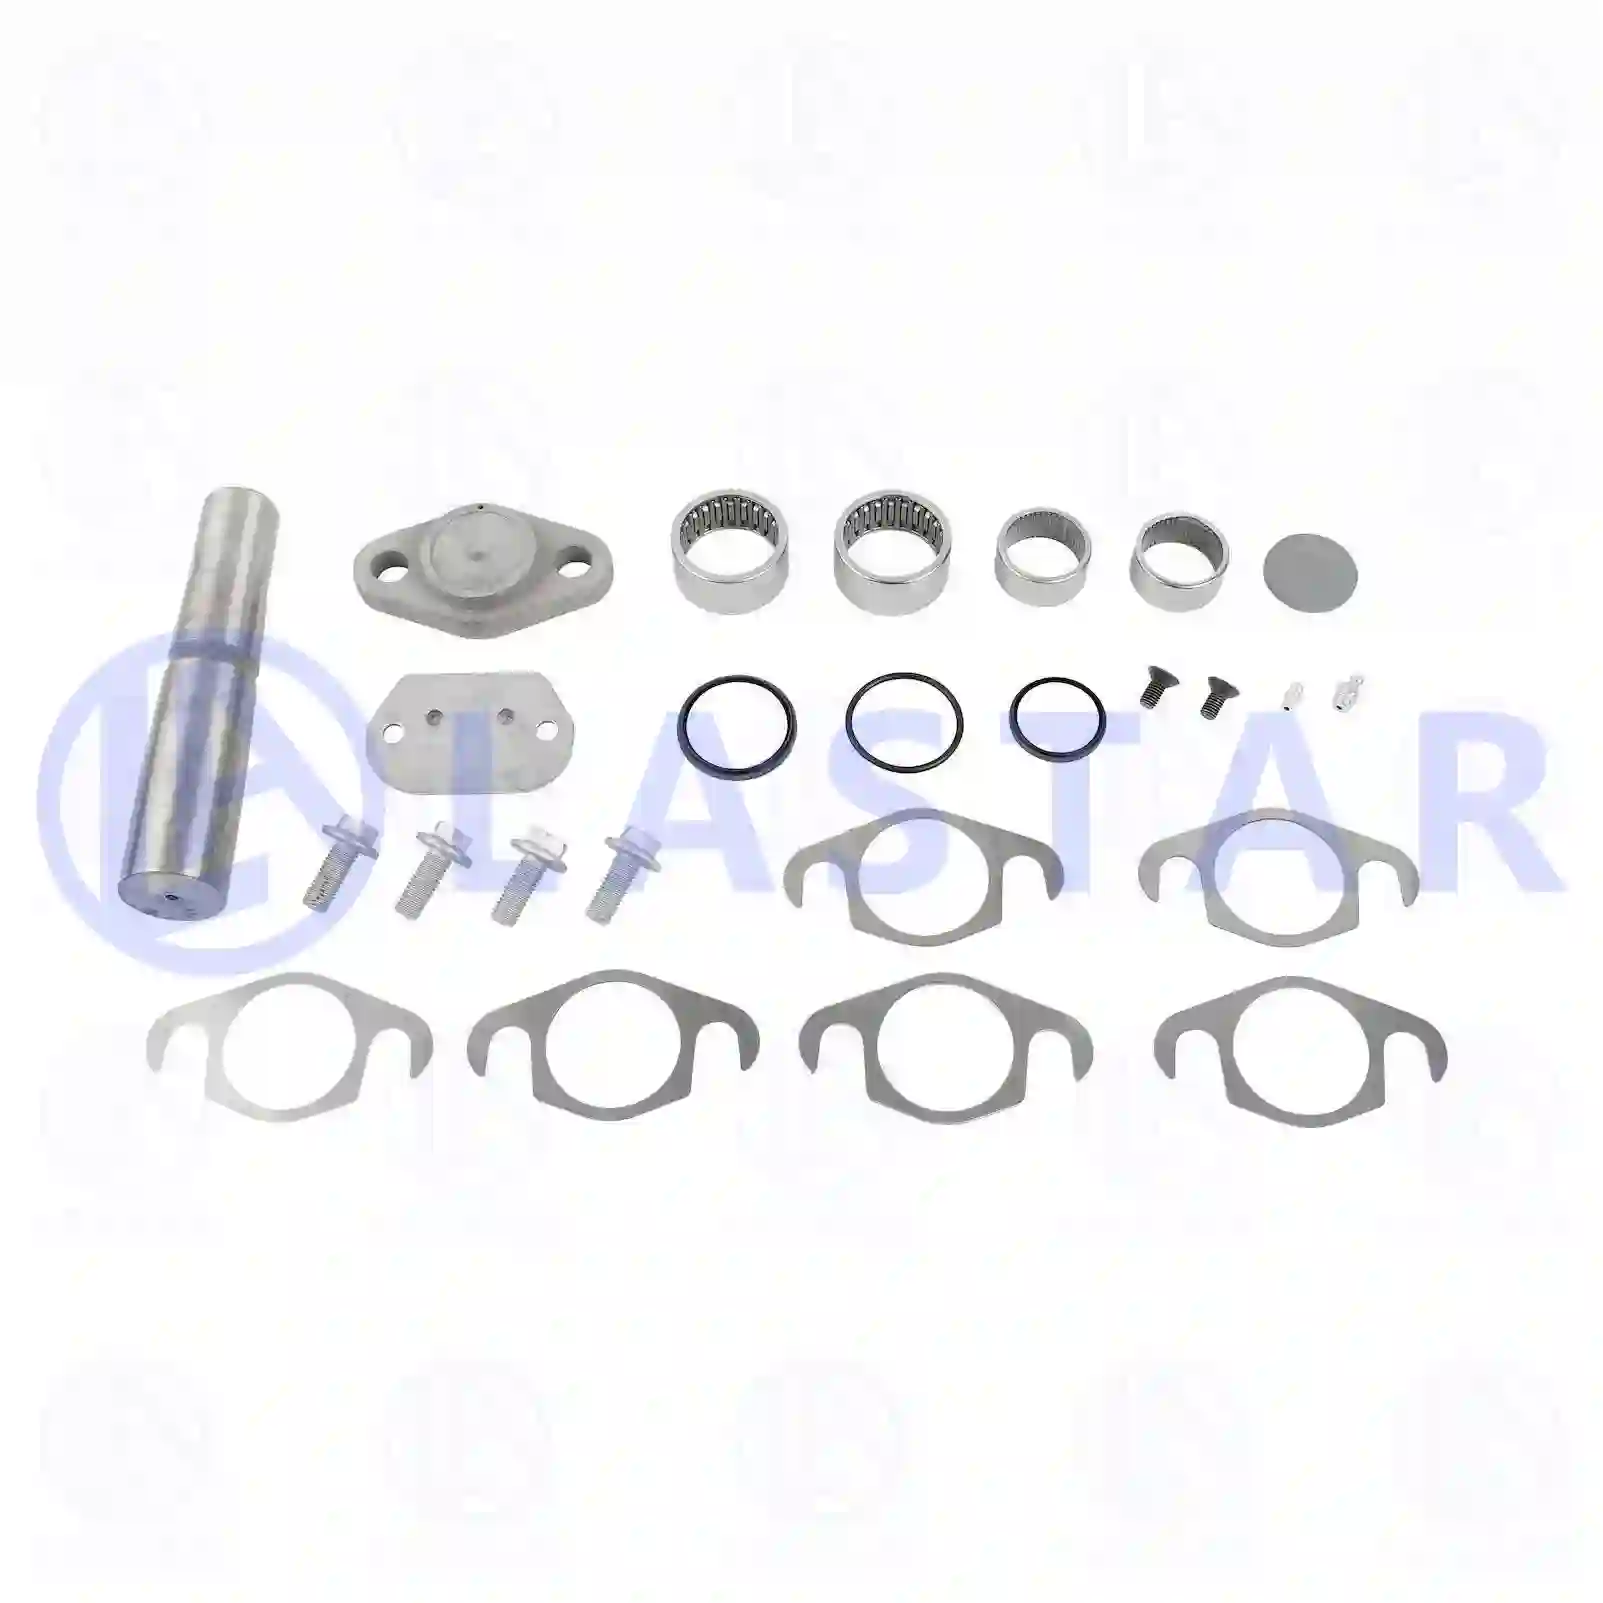 King pin kit, right, 77731364, 02995709, 2995709, ||  77731364 Lastar Spare Part | Truck Spare Parts, Auotomotive Spare Parts King pin kit, right, 77731364, 02995709, 2995709, ||  77731364 Lastar Spare Part | Truck Spare Parts, Auotomotive Spare Parts